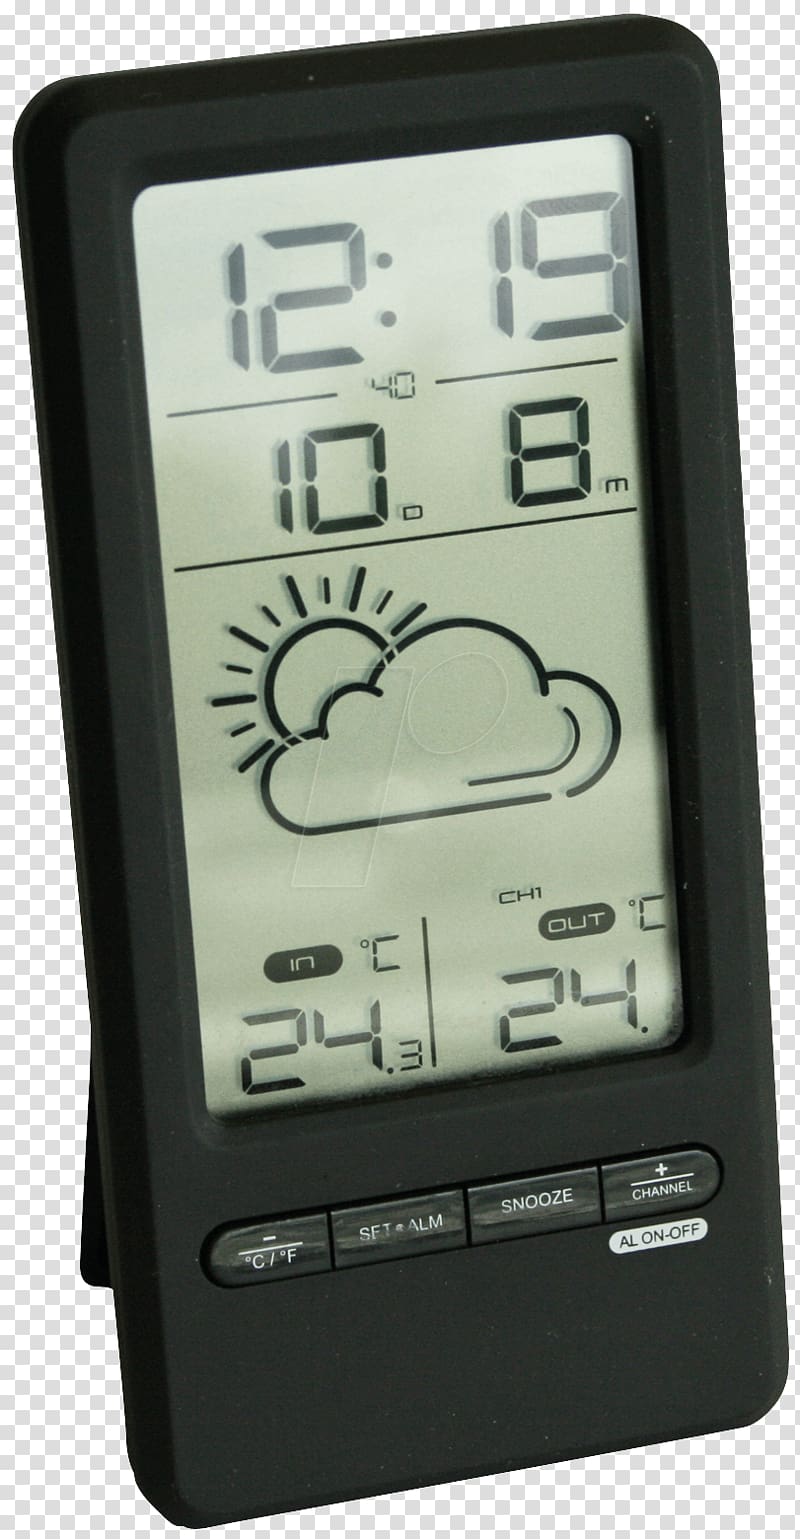 Weather station Thermometer Rain Gauges Termómetro digital Wind, Weather Station transparent background PNG clipart